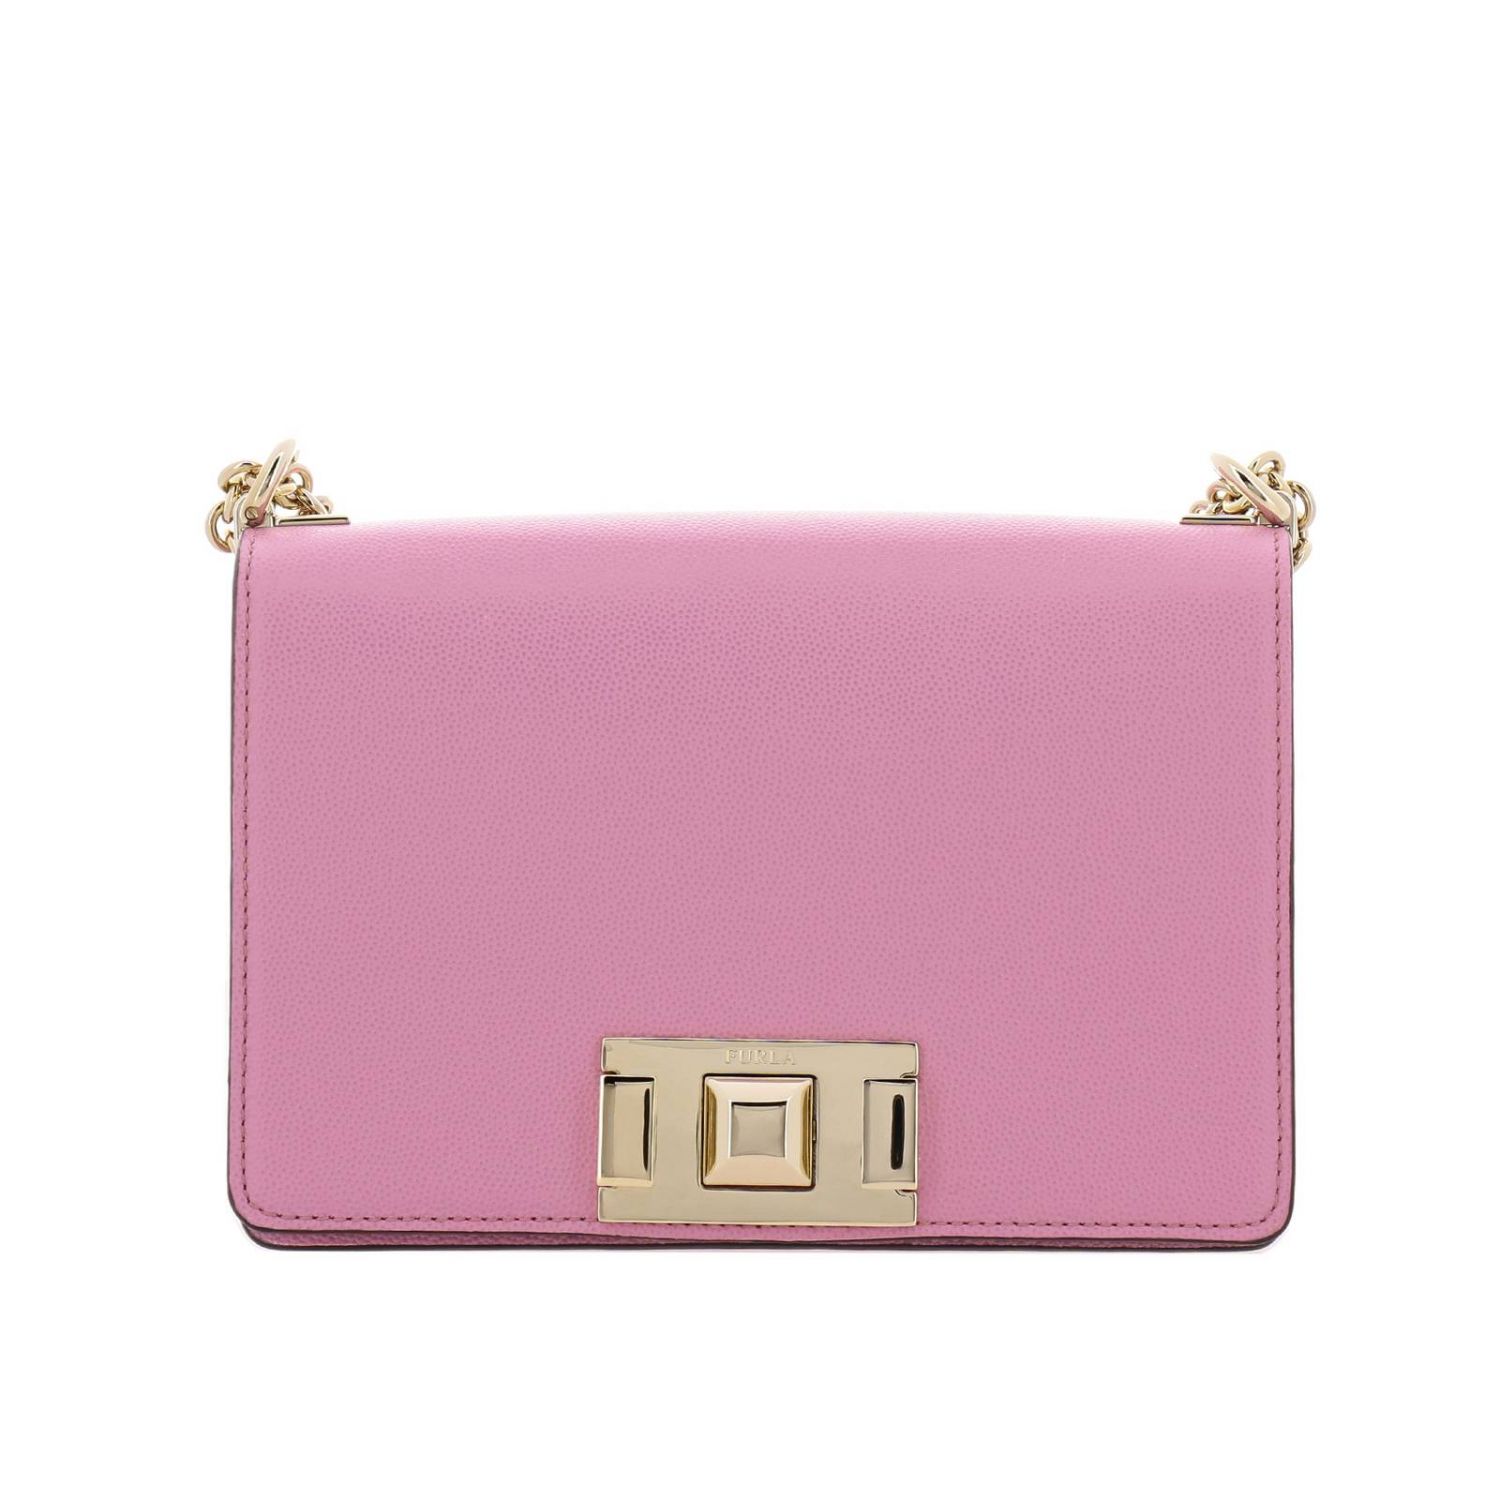 Furla Outlet: Mimì mini bag in textured leather with shoulder strap ...